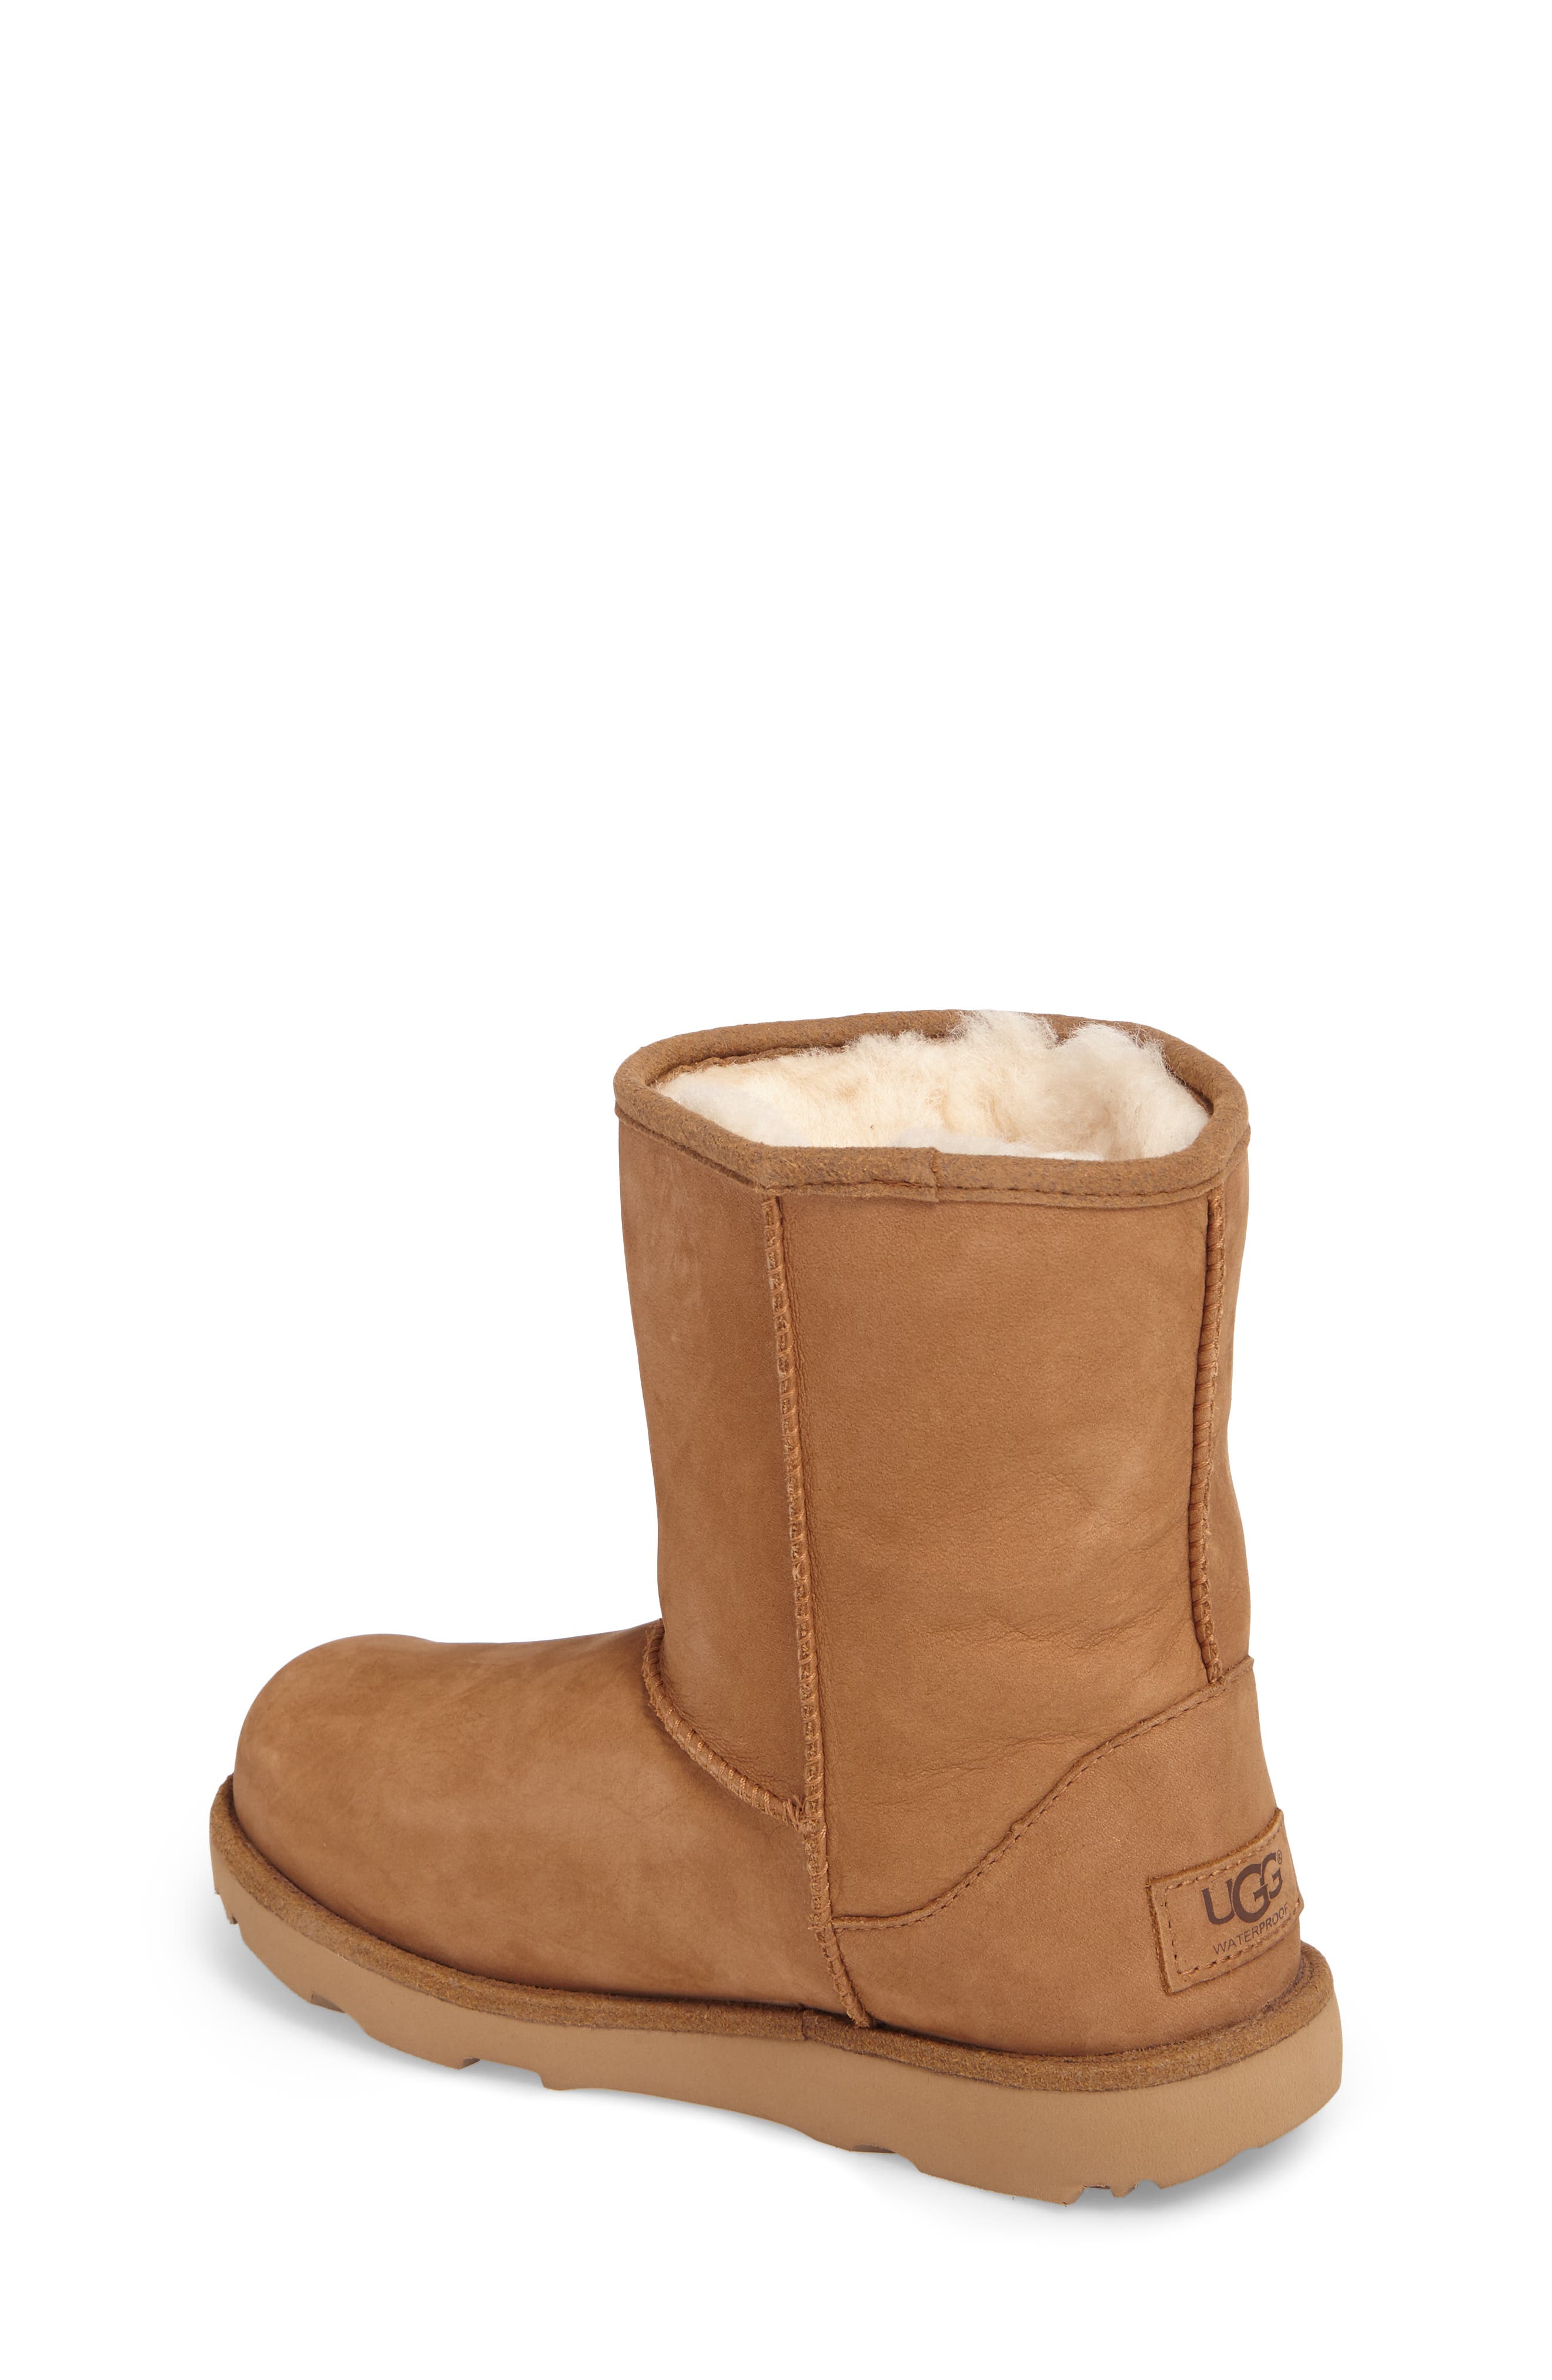 uggs brown boots